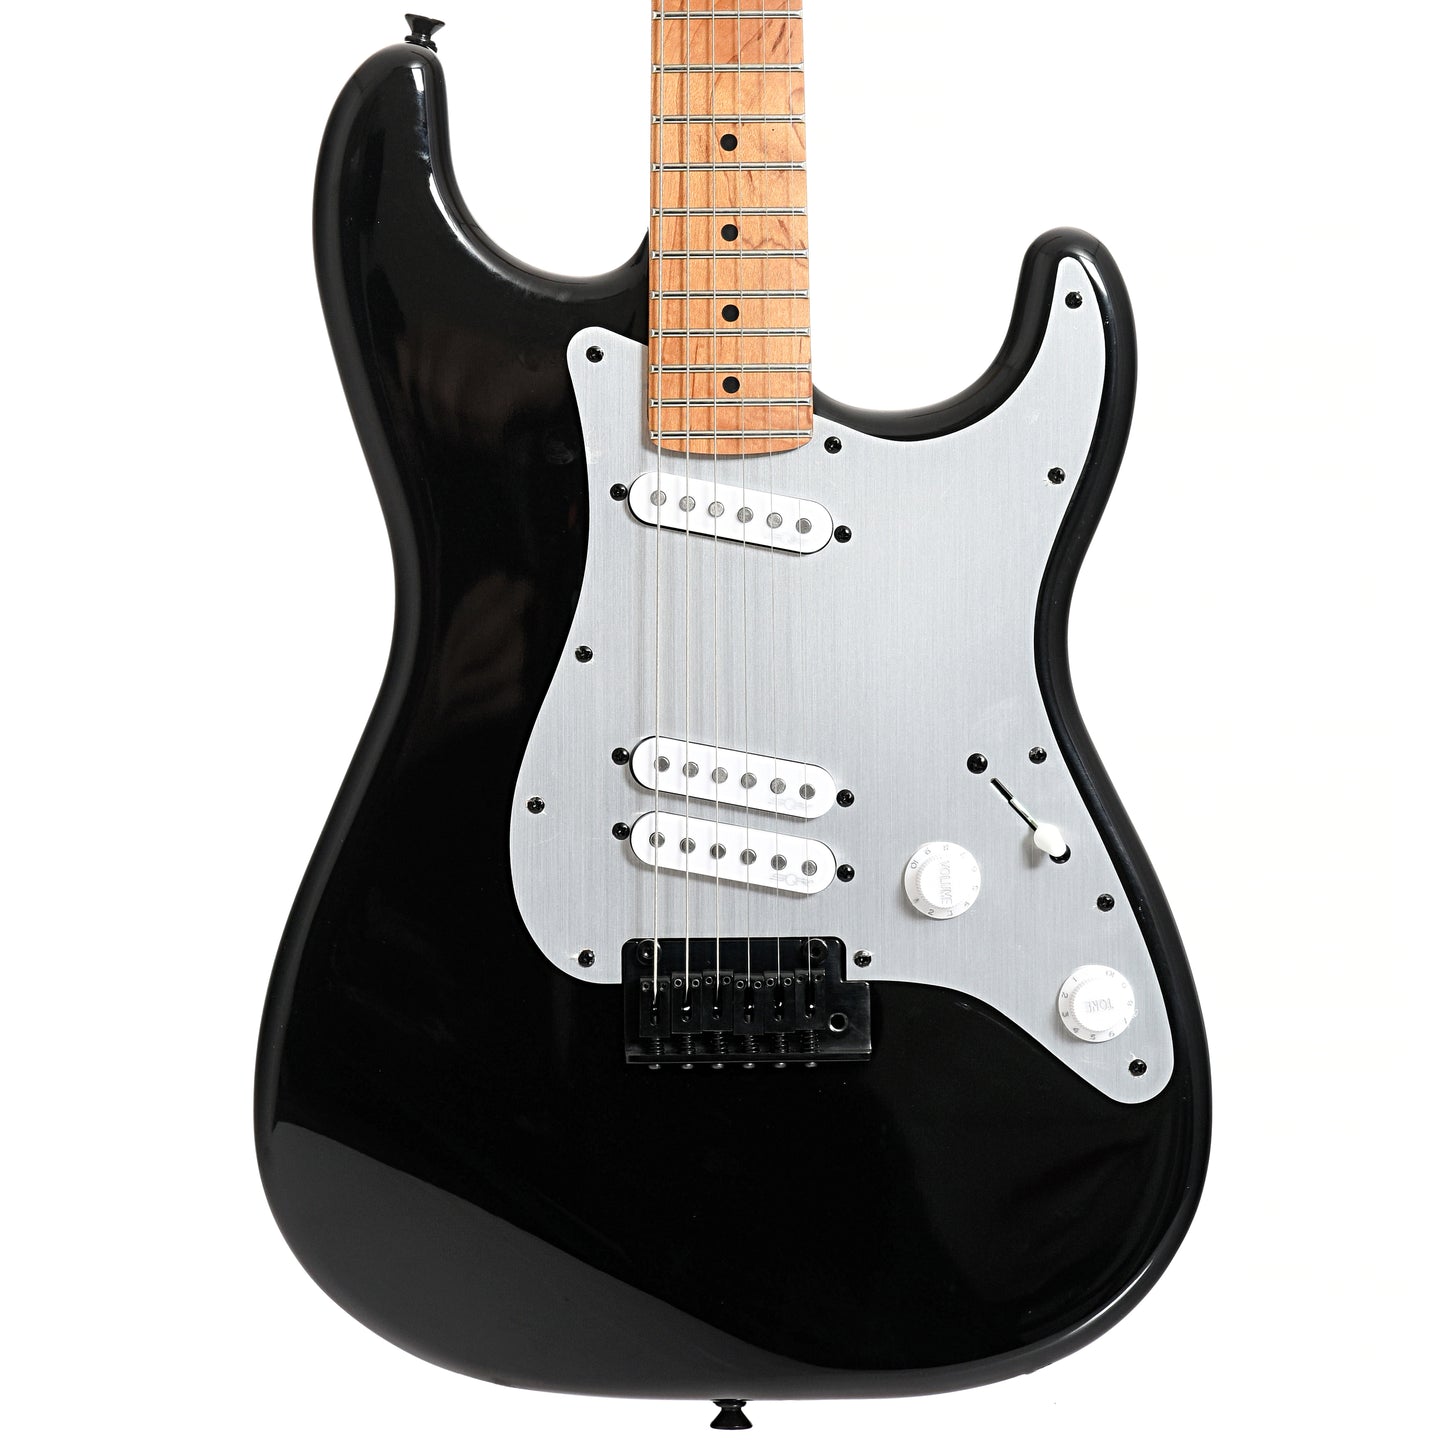 Image 2 of Squier Contemporary Stratocaster Special, Black - SKU# SCSSB : Product Type Solid Body Electric Guitars : Elderly Instruments